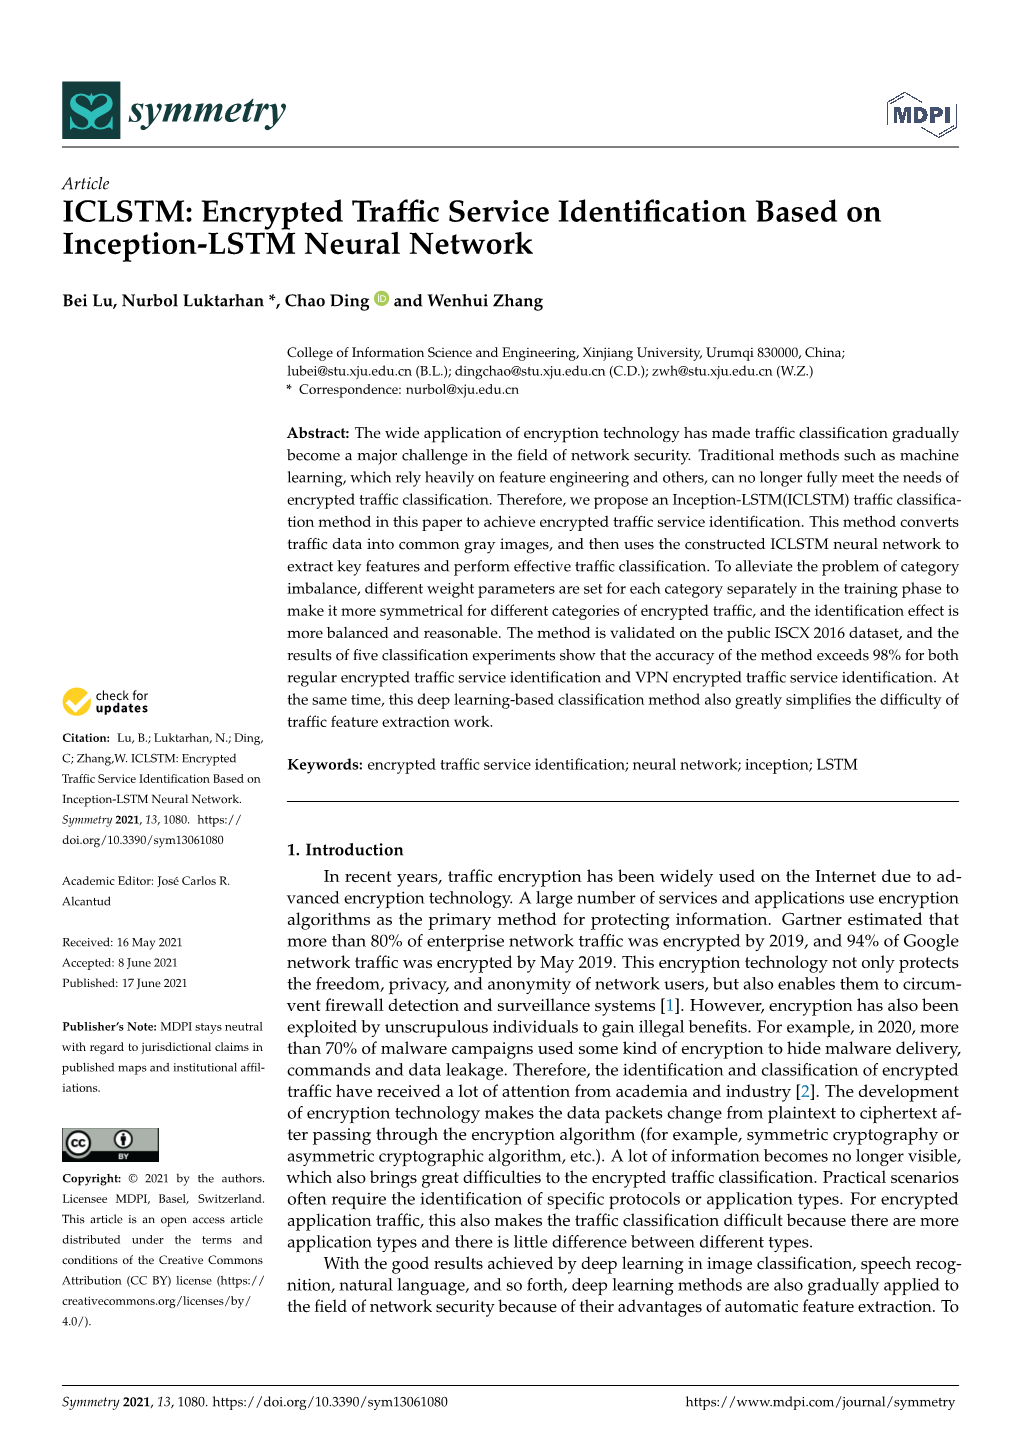 Encrypted Traffic Service Identification Based on Inception-LSTM